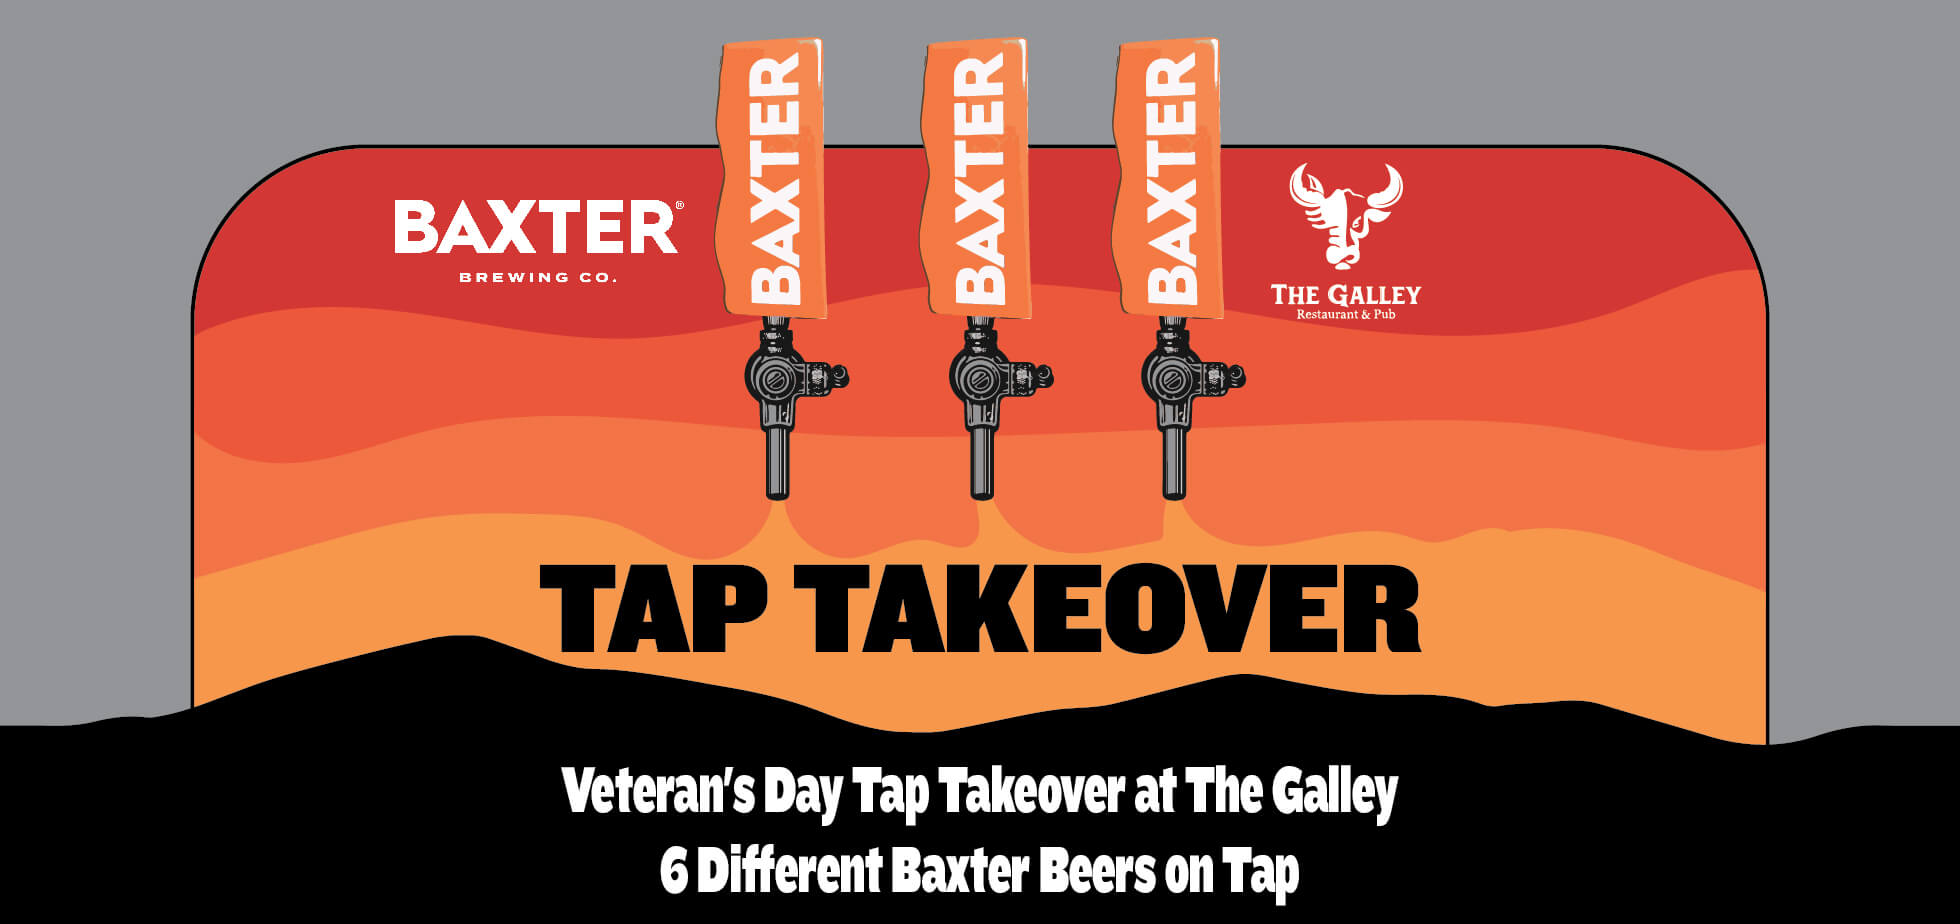 image promoting a tap takeover at The Galley on November 11th